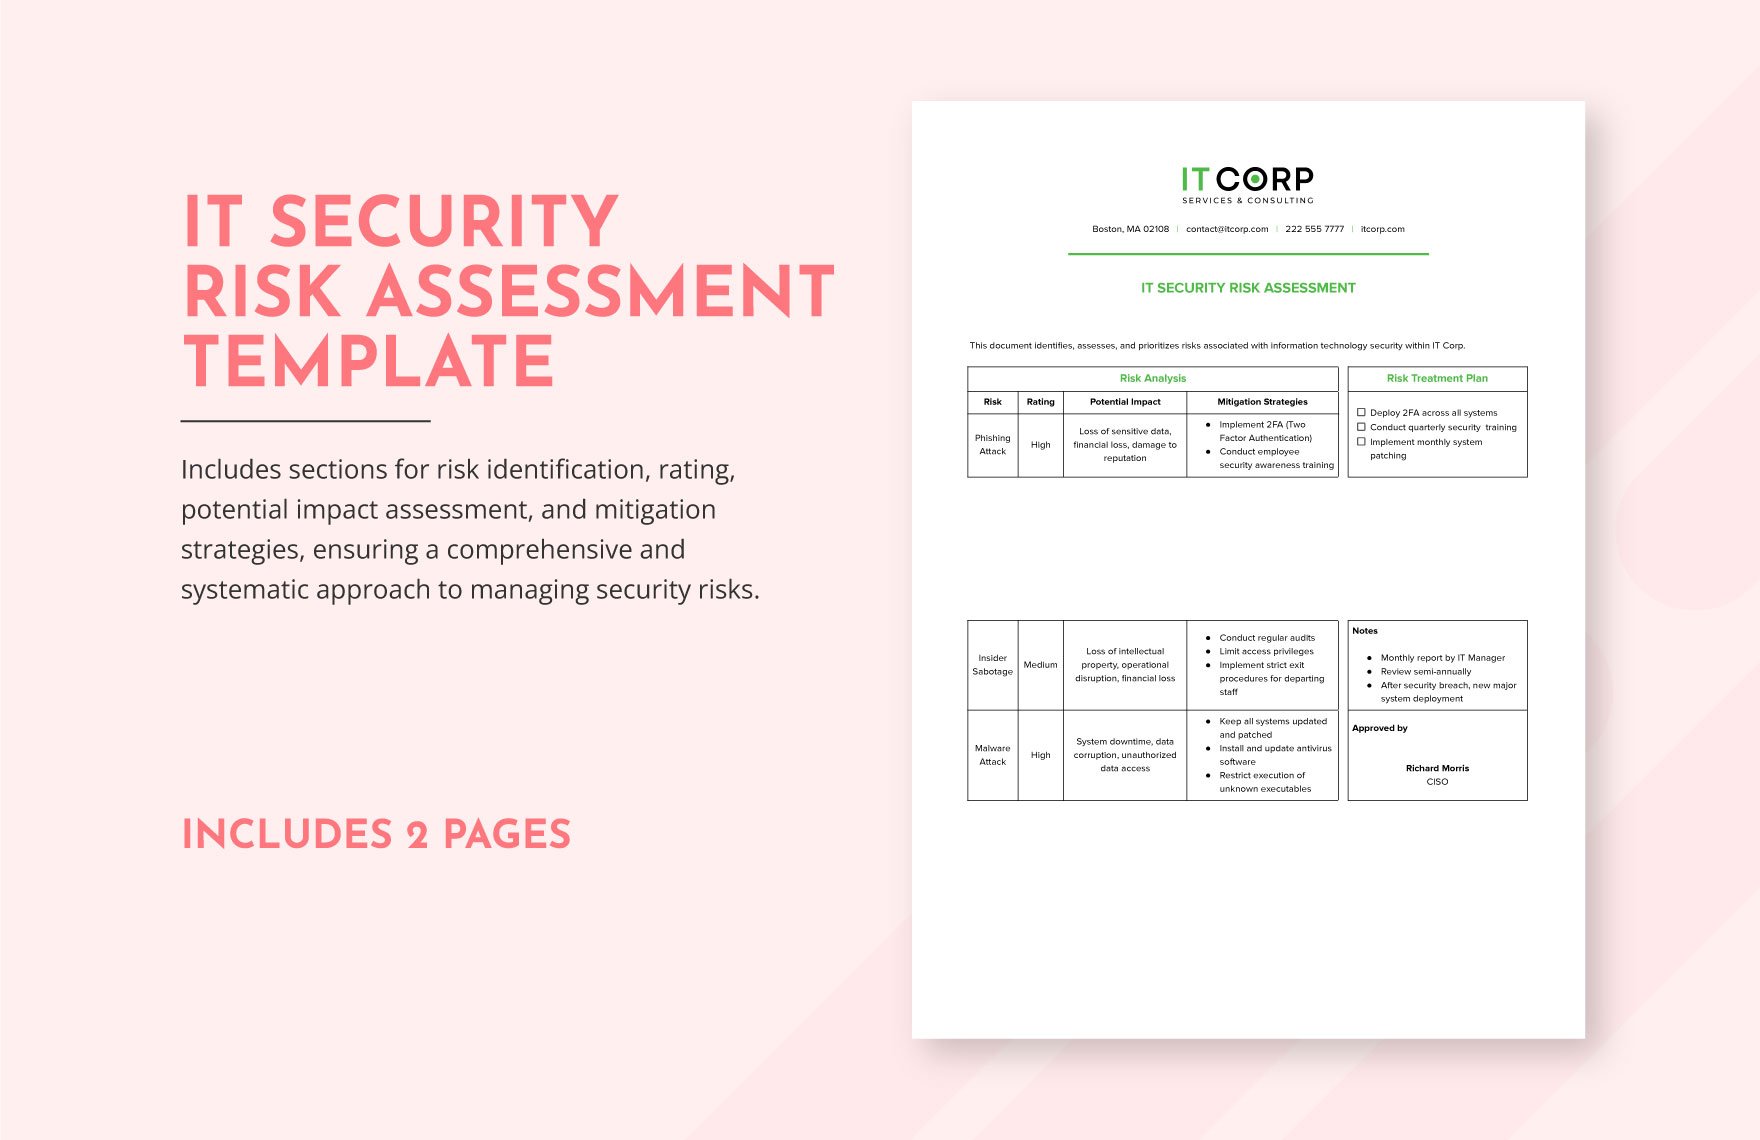 IT Security Risk Assessment Template in Word, Google Docs, PDF